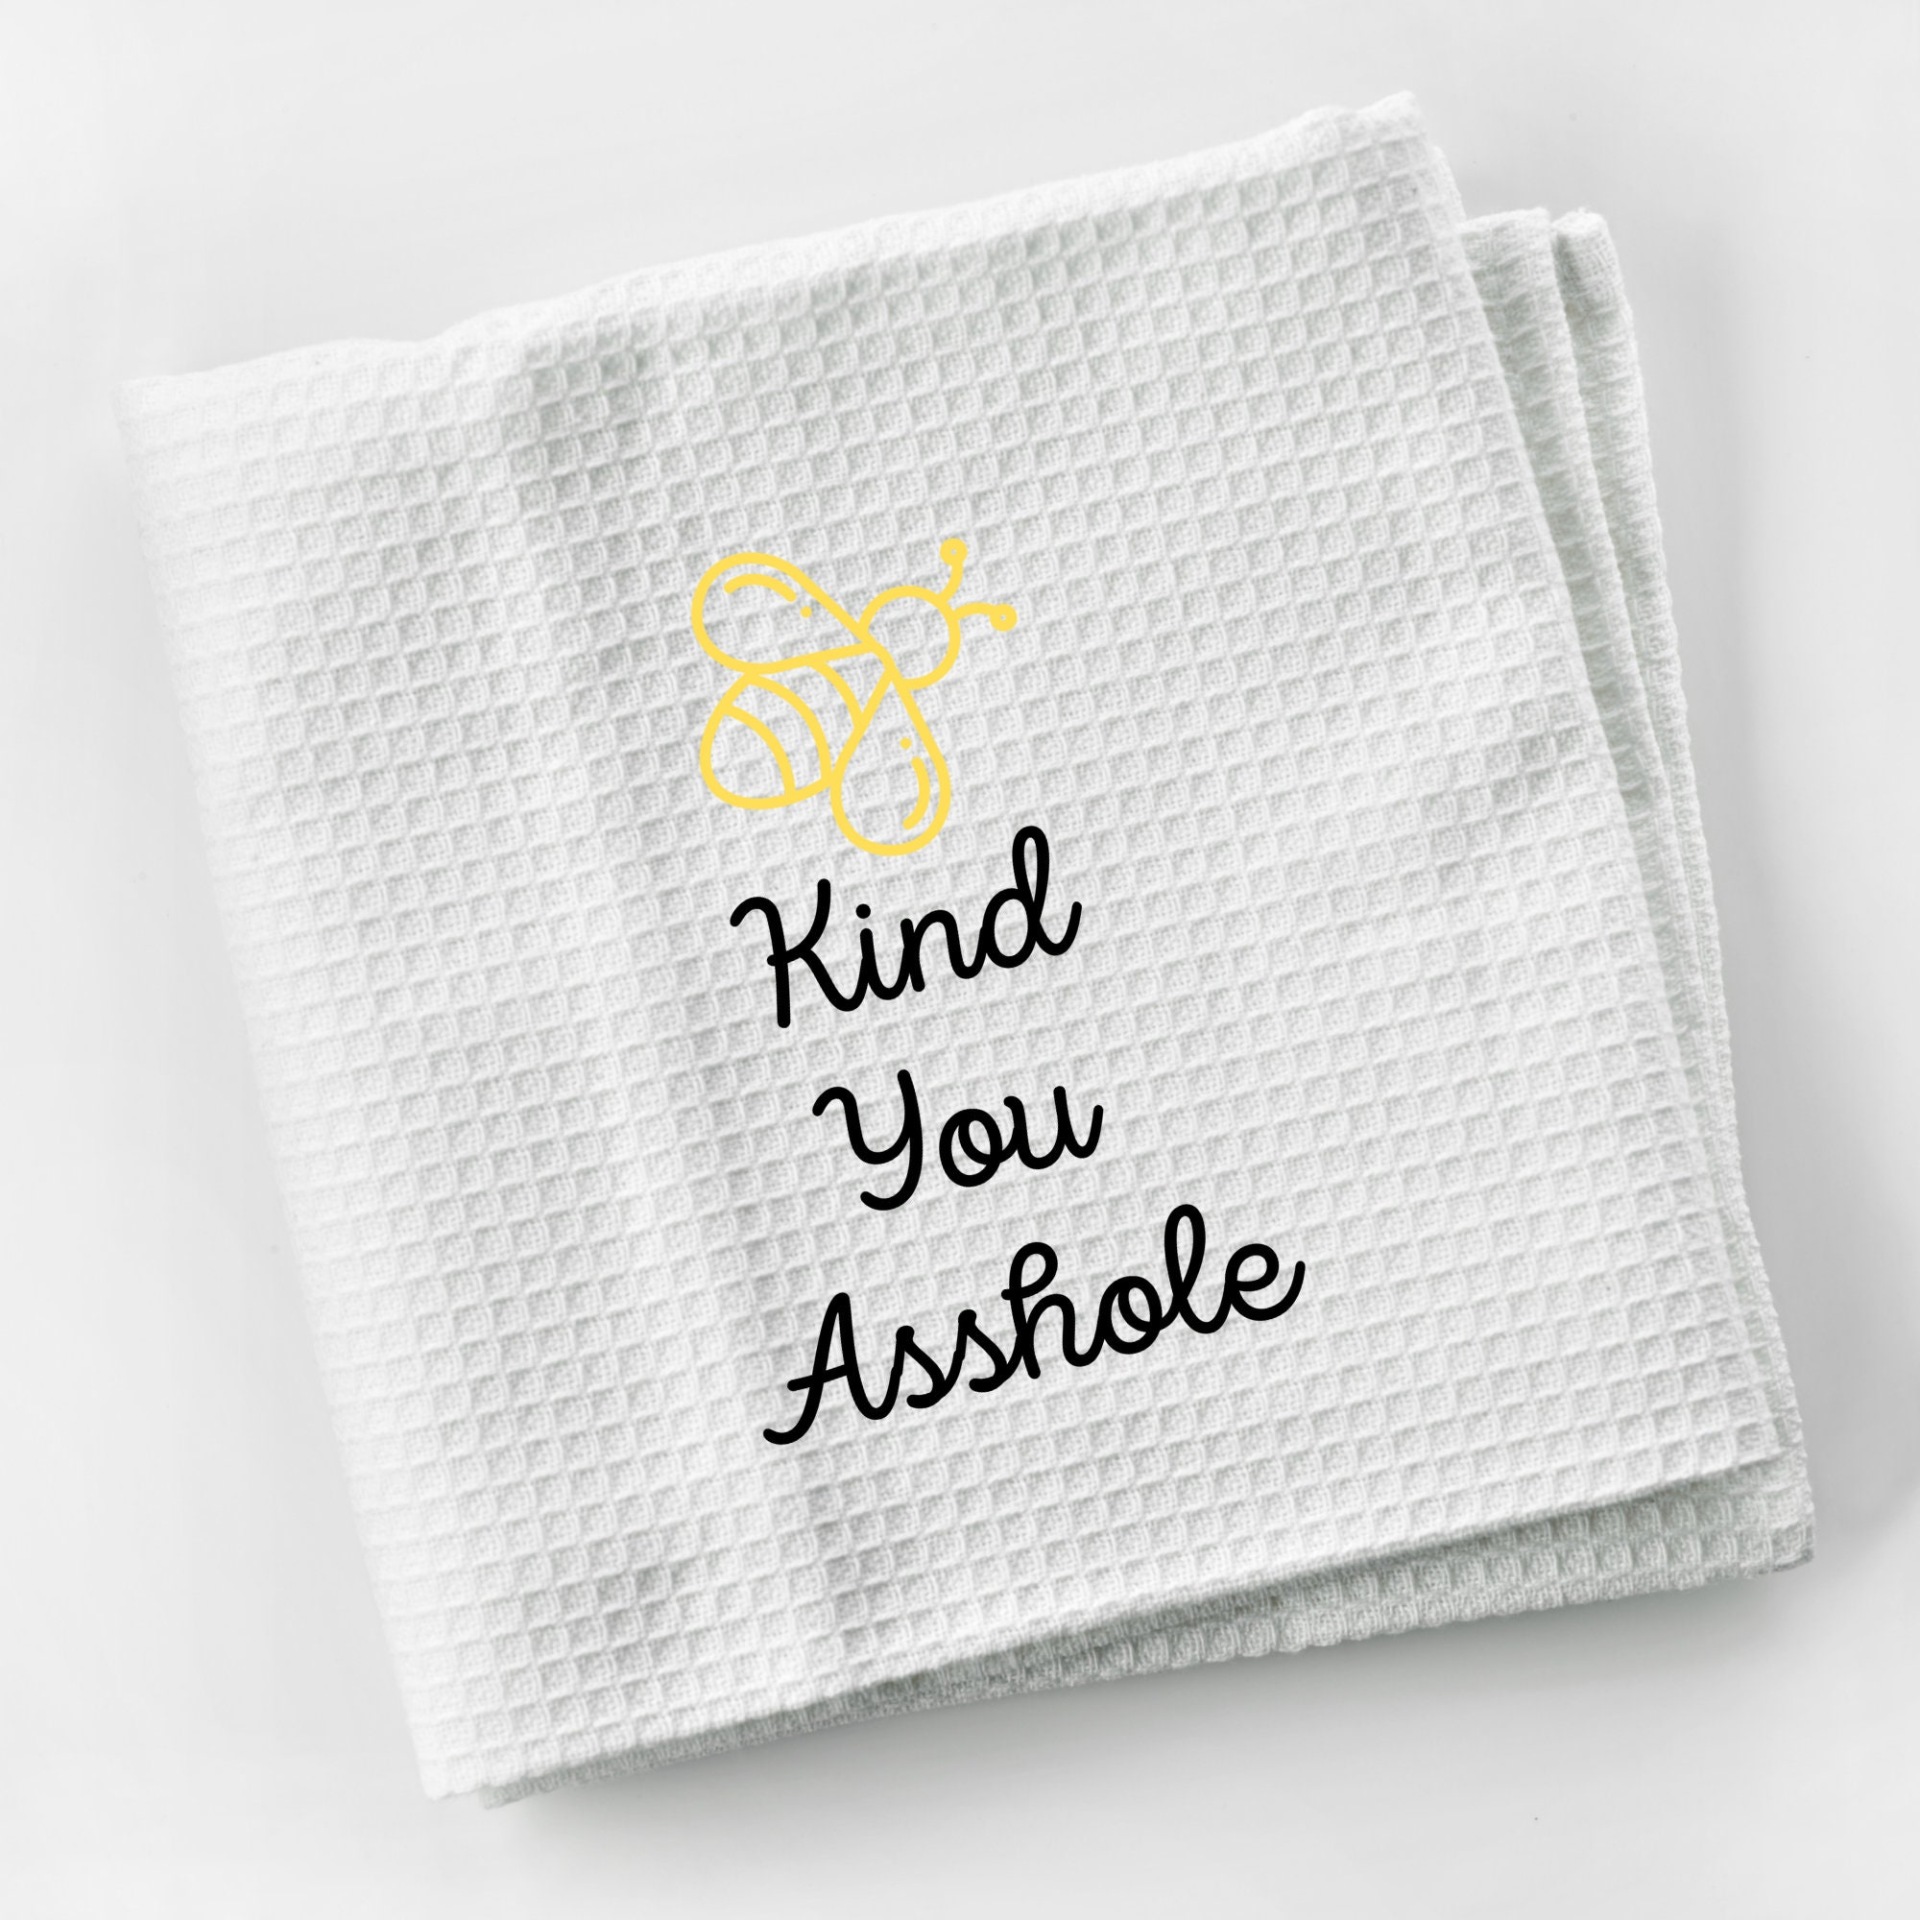 Bee Kind You Asshole Dish Towel | Funny Kitchen Towel with Sarcastic Quote | Decorative Hand Towel for Girlfriend Gift, Goodies N Stuff